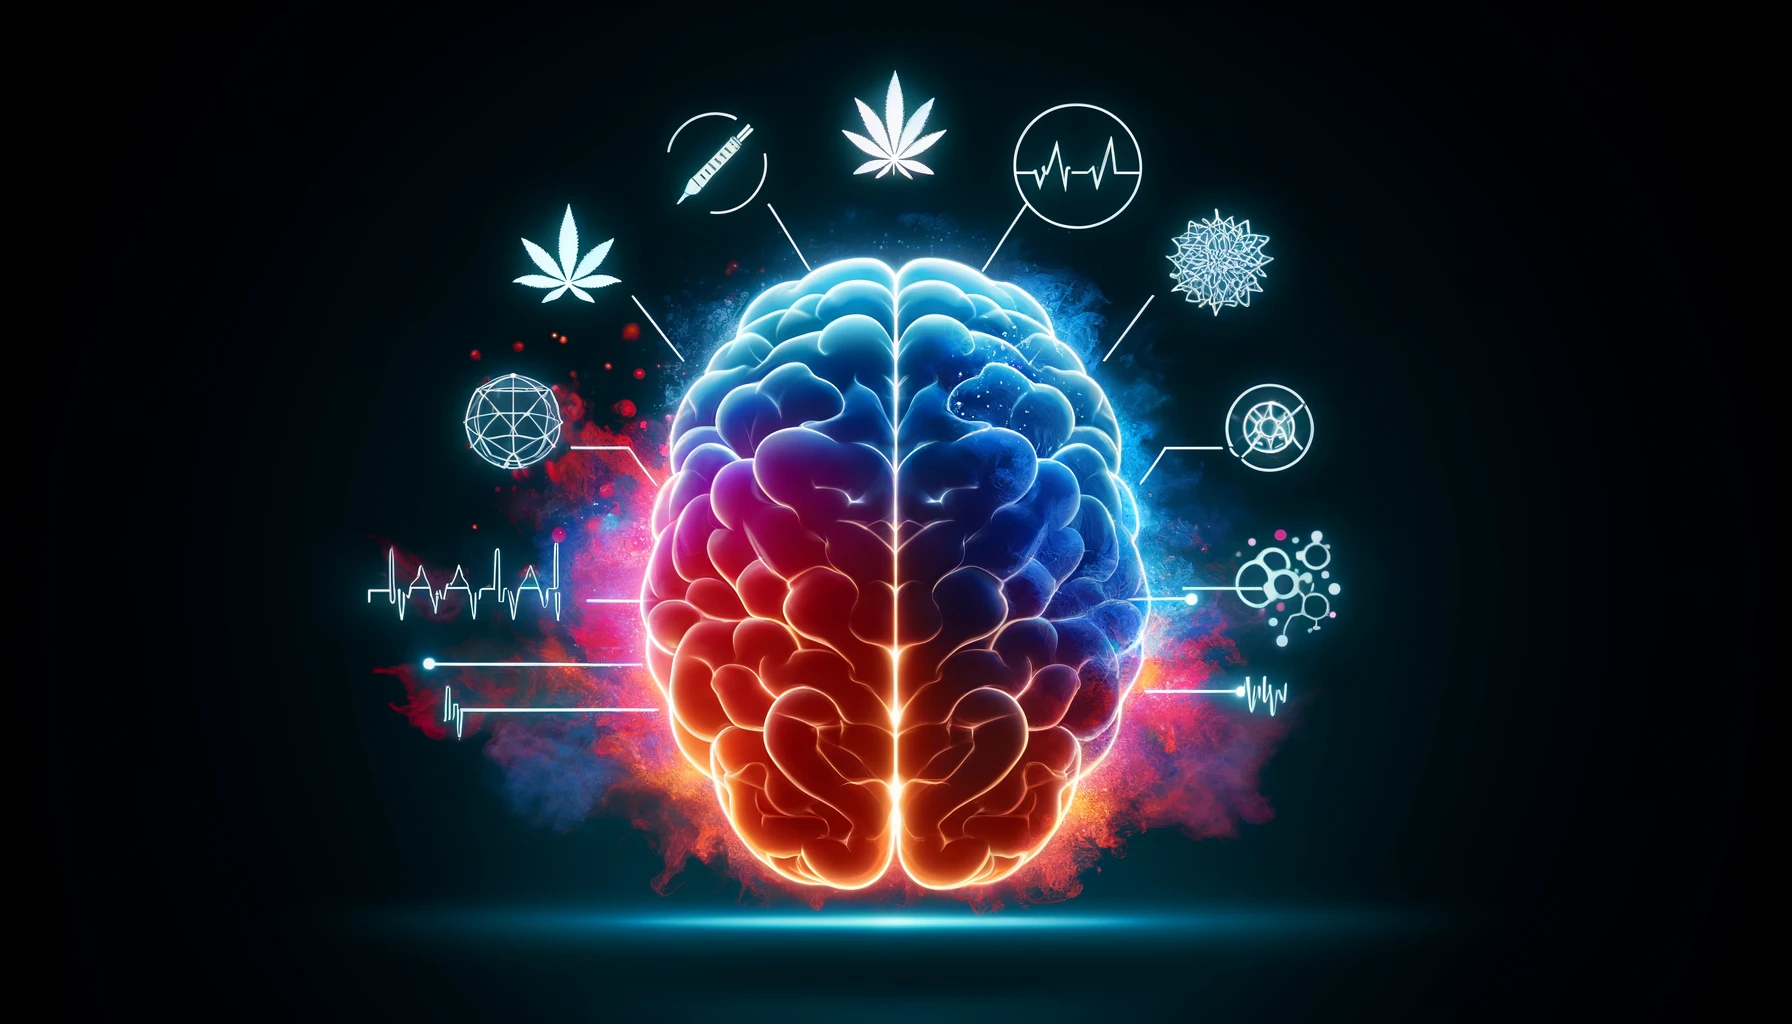 A creative representation of a brain with different areas lighting up, indicating activity. This image should depict the influence of cannabis on the brain.